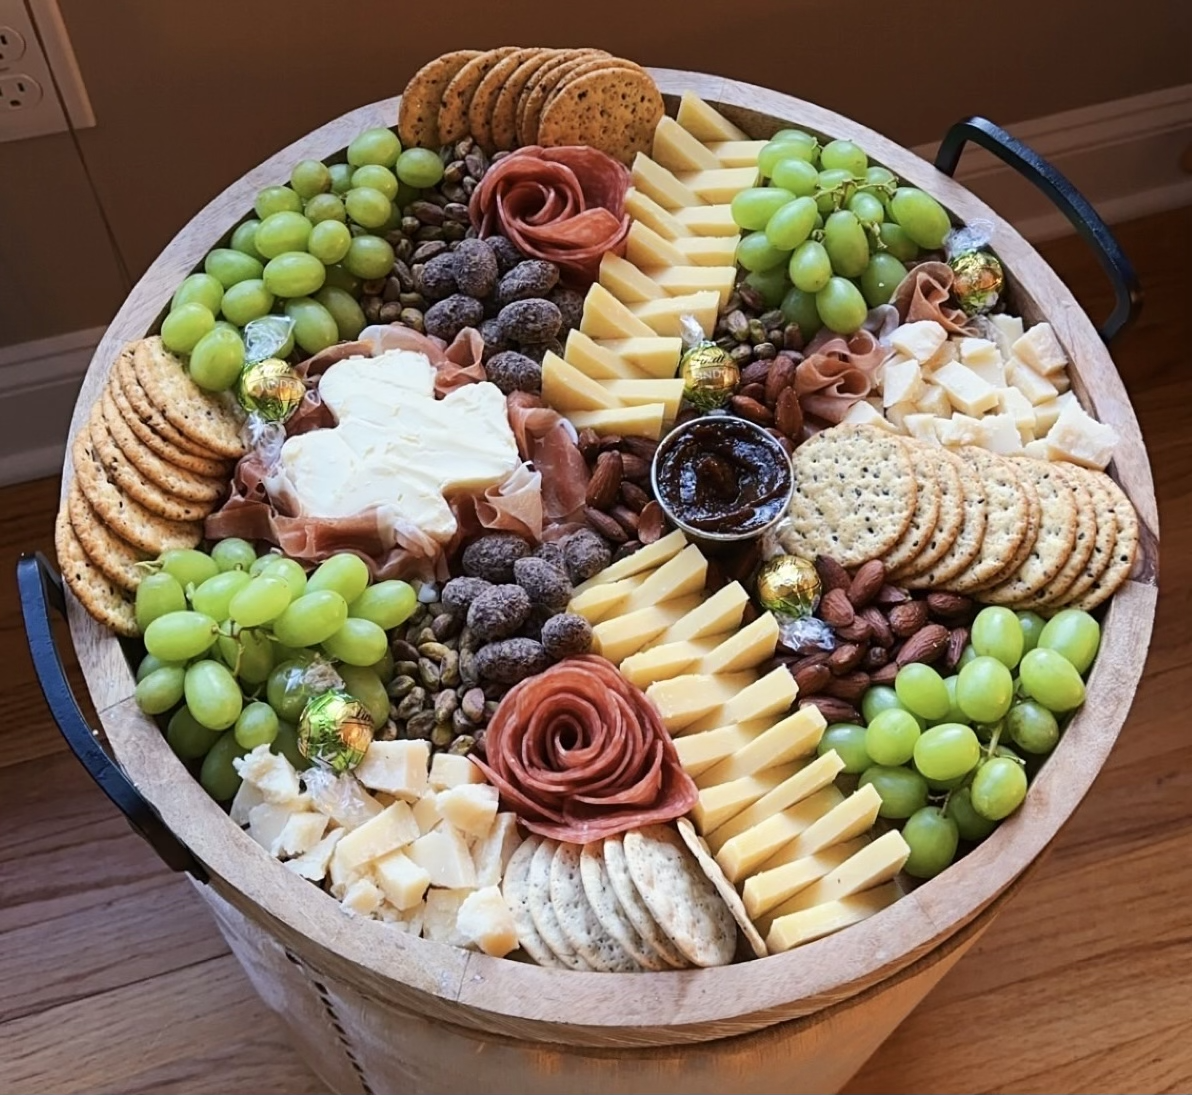 Example of a Cheese and Cracker NJ charcuterie board by Allie Constantinou